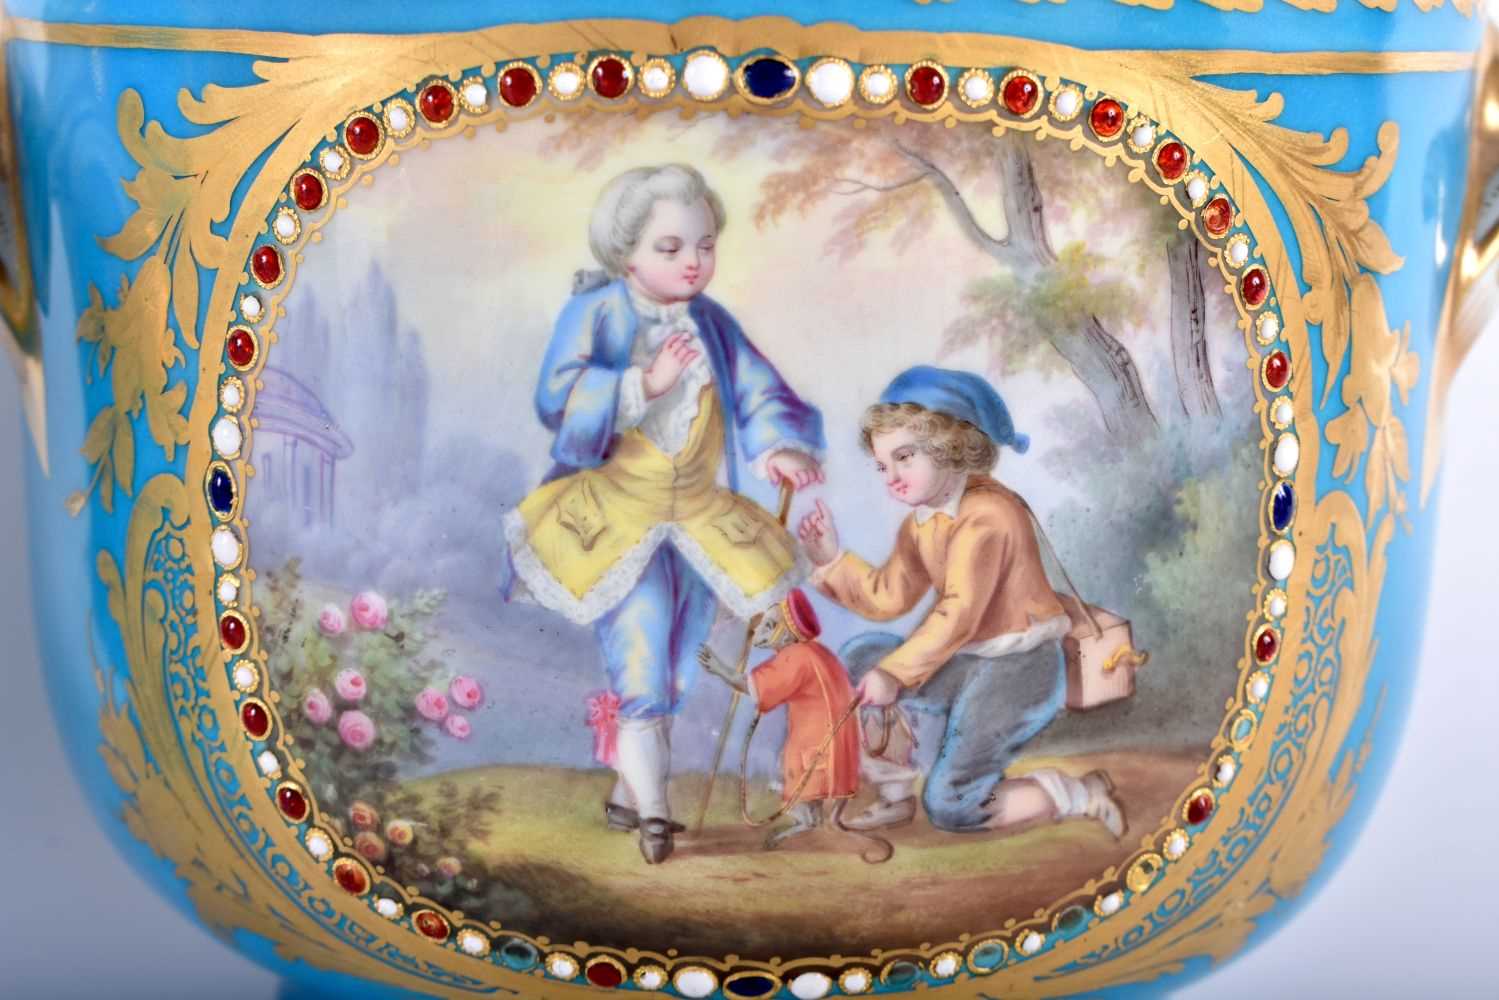 A PAIR OF 19TH CENTURY FRENCH SEVRES PORCELAIN CACHE POT painted with figures in landscapes, with - Image 2 of 8